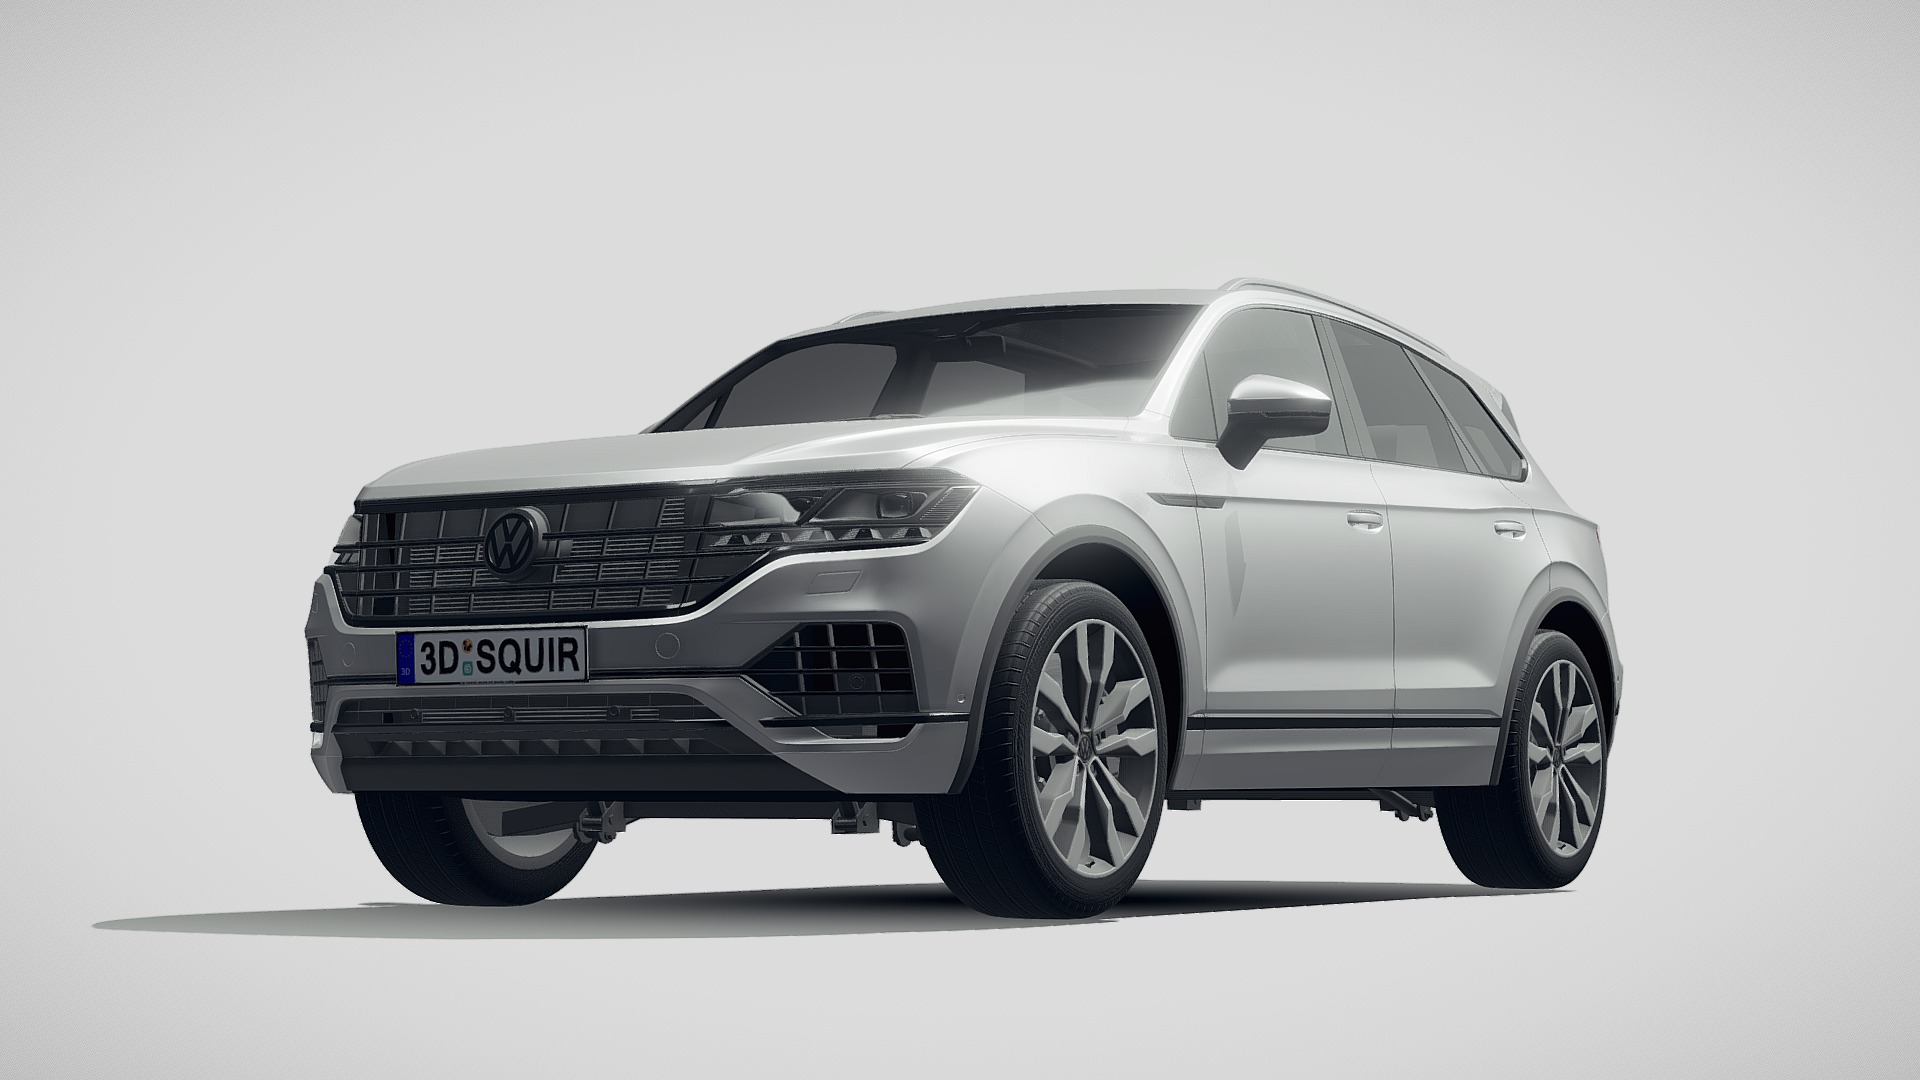 3D model Volkswagen Touareg 2019 - This is a 3D model of the Volkswagen Touareg 2019. The 3D model is about a silver car with a black background.